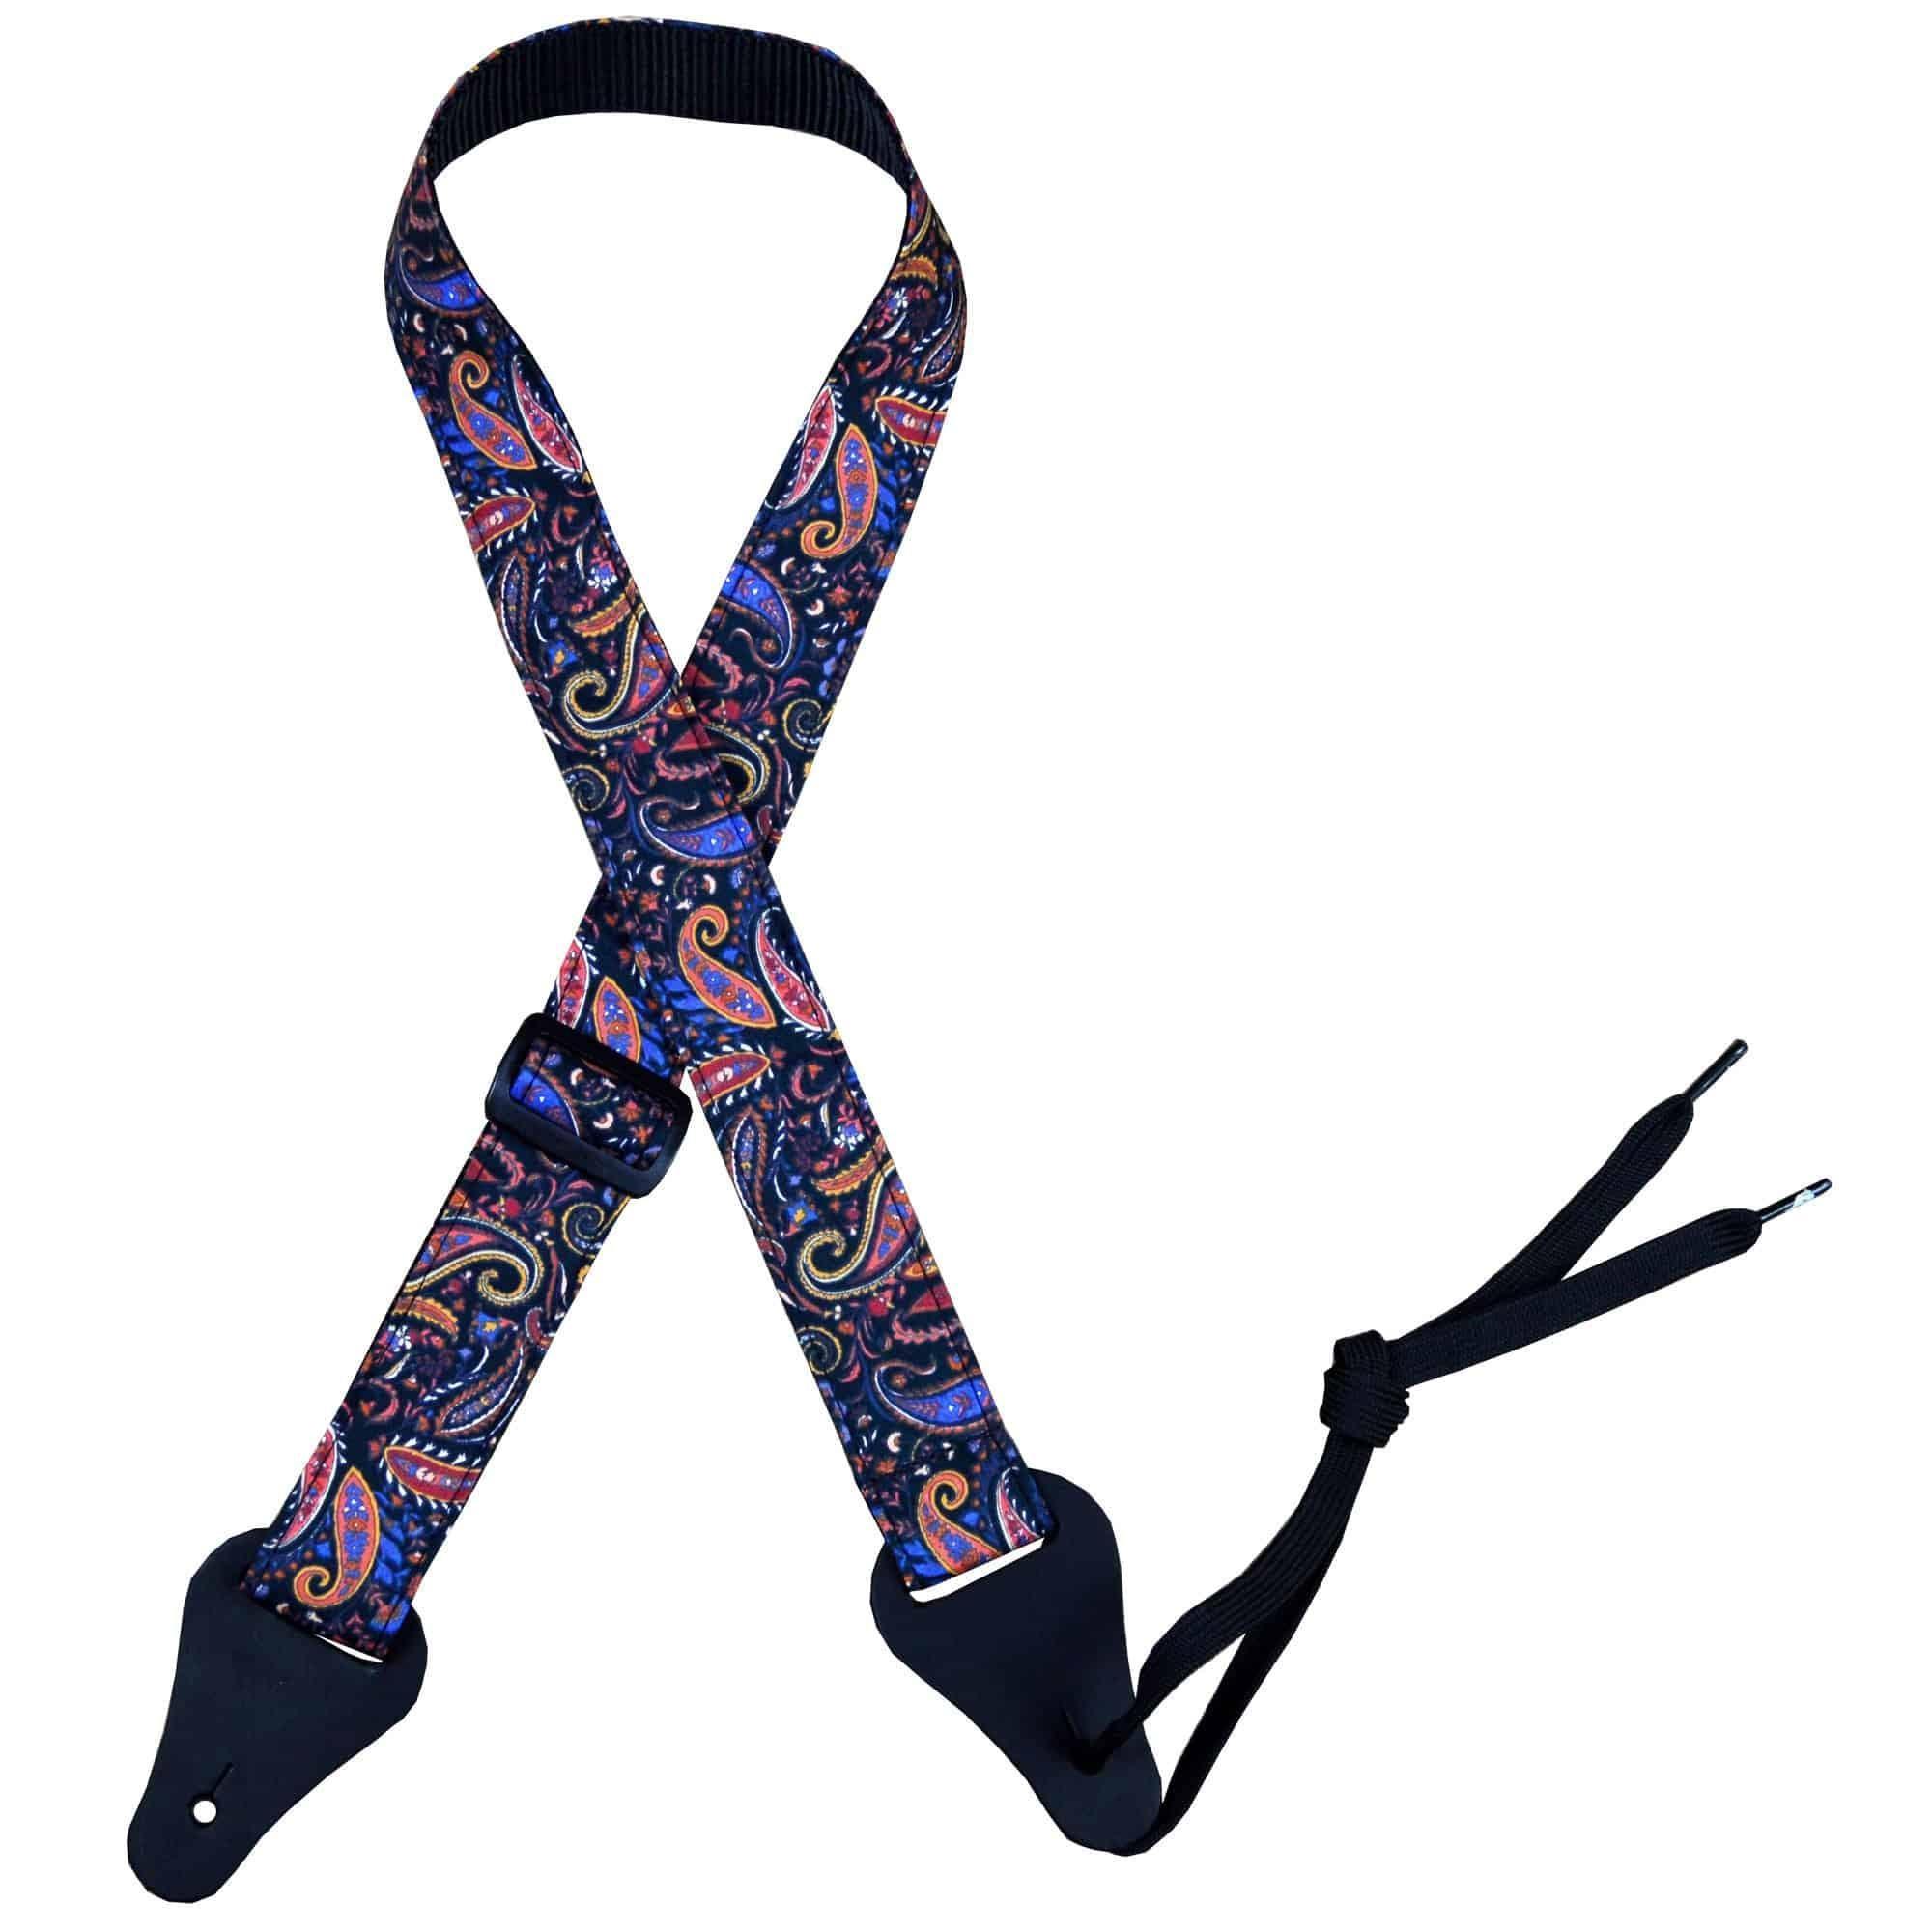 Multi-Coloured Paisley Rag Ukulele Strap - Straps by Colonial Leather at Muso's Stuff